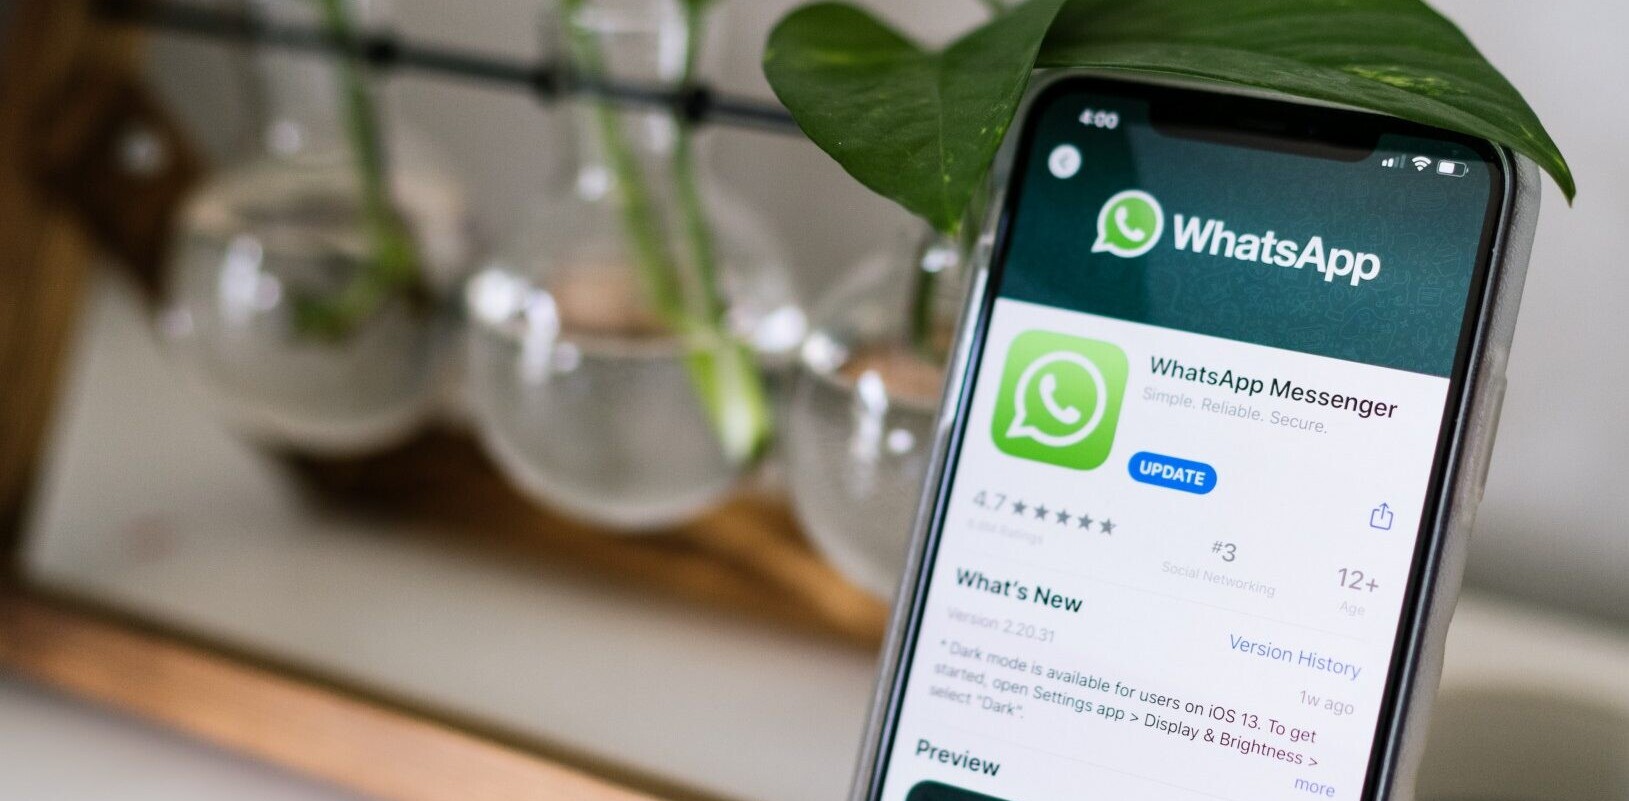 WhatsApp might finally sync your chats between iOS and Android